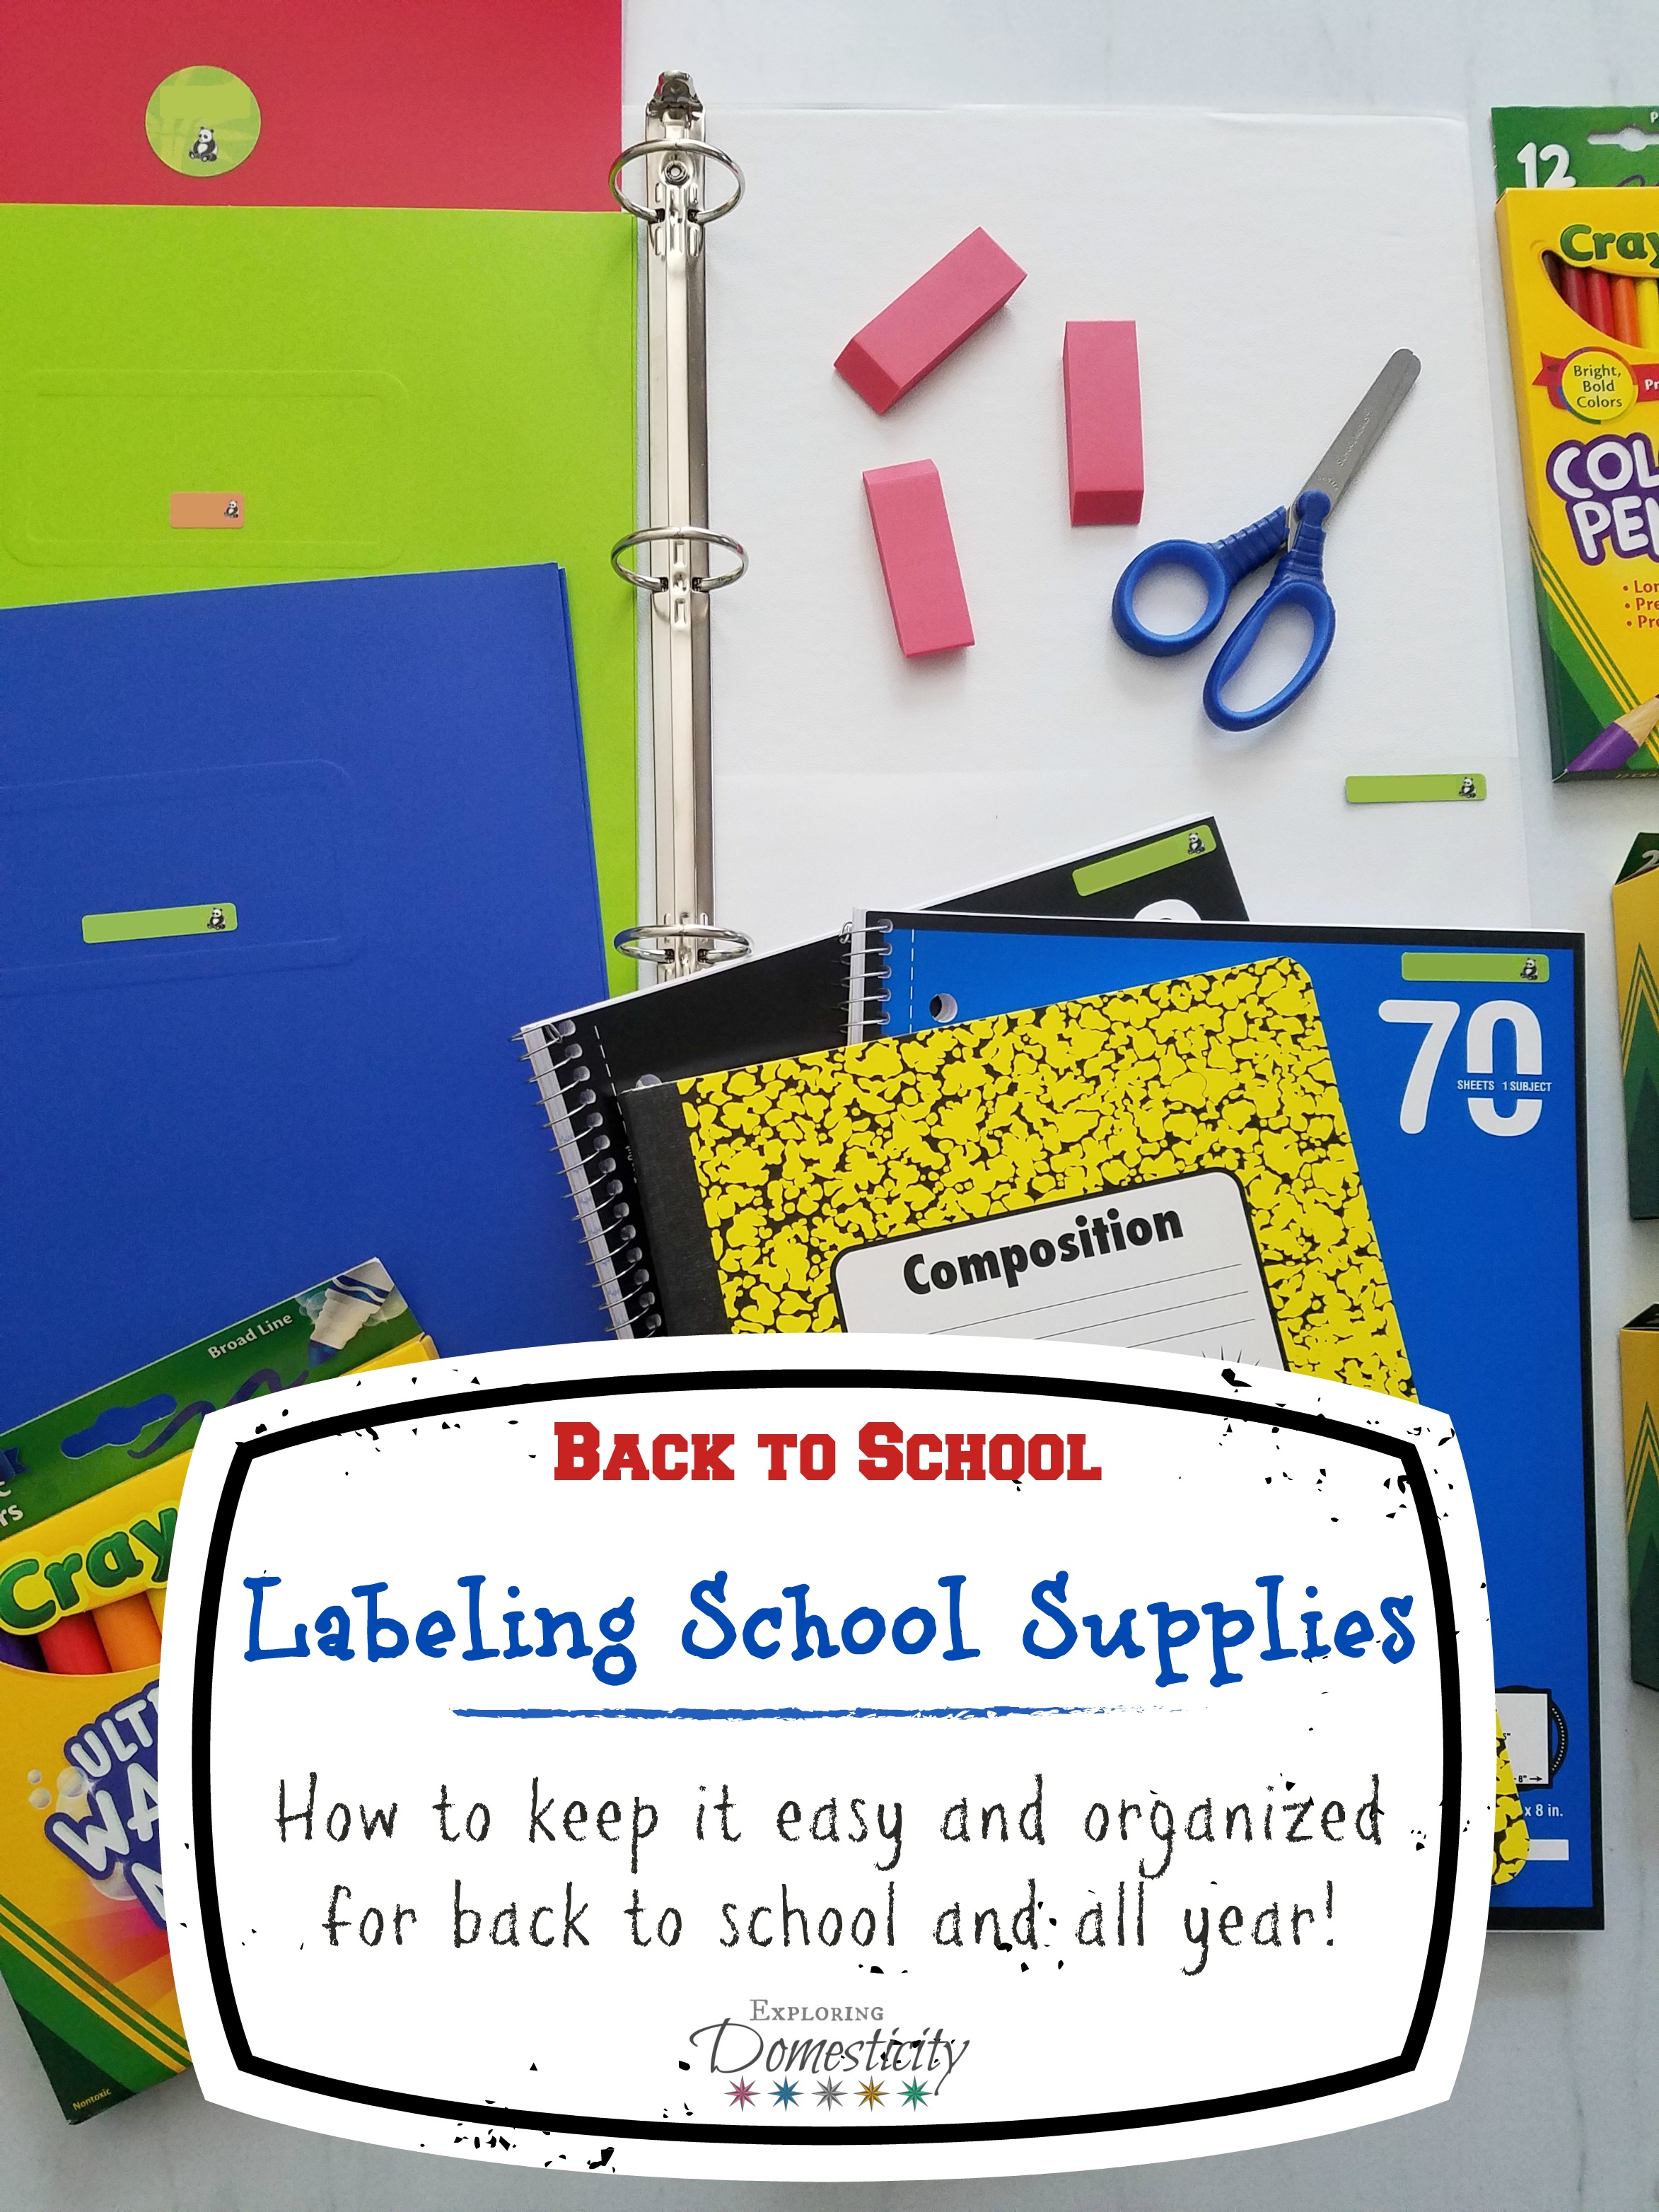 Labeling School Supplies - How to keep it easy and organized